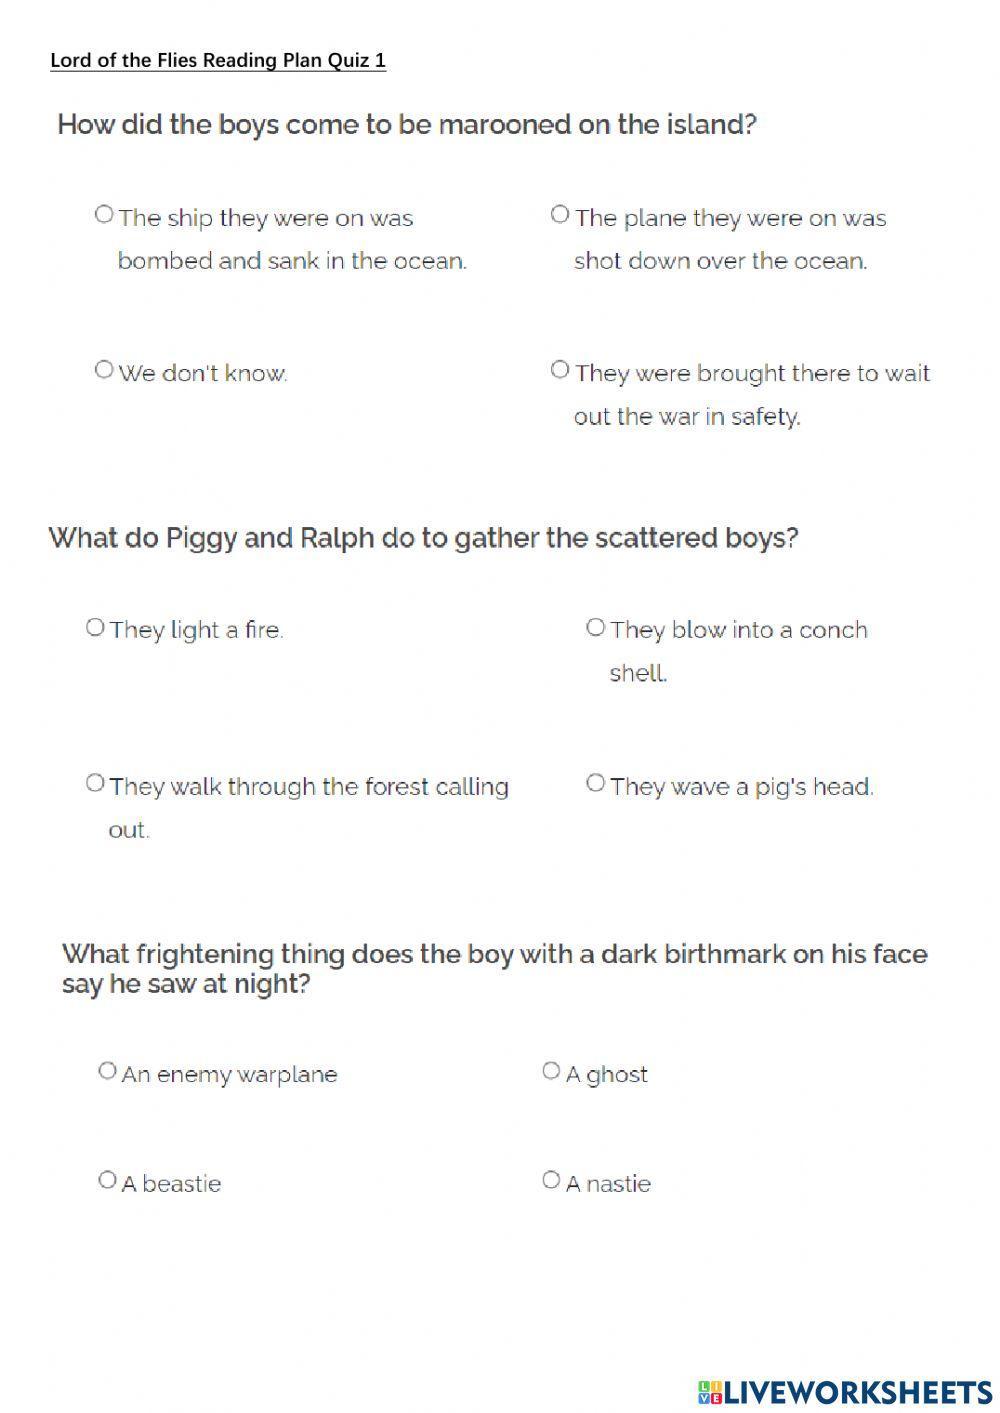 Lord of the Flies Reading Plan Quiz 1